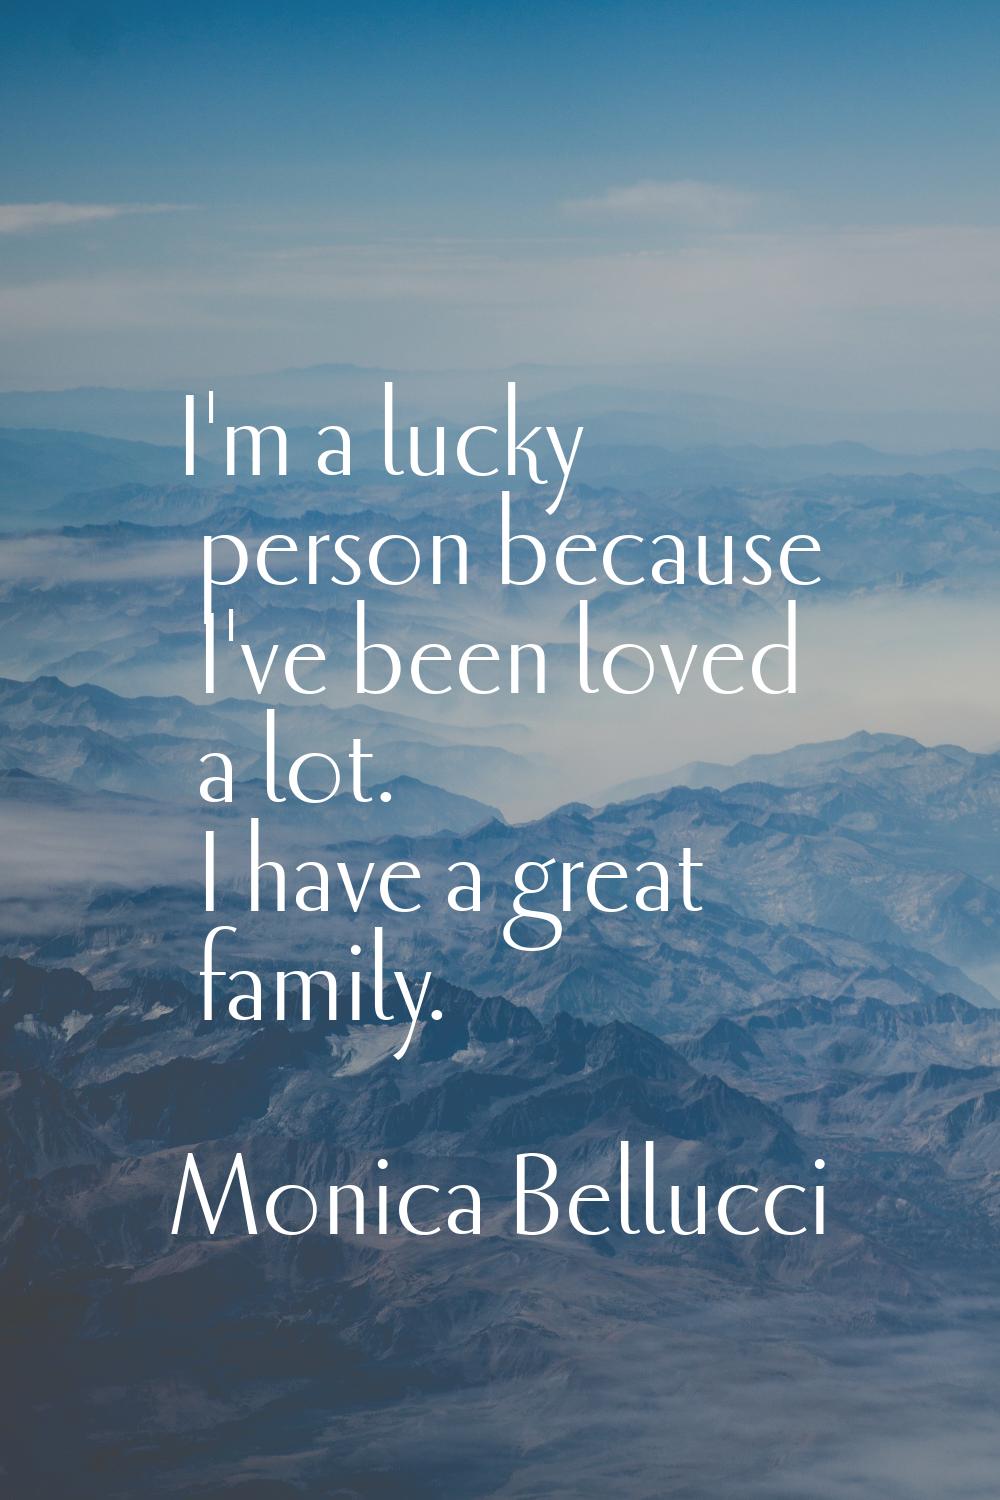 I'm a lucky person because I've been loved a lot. I have a great family.